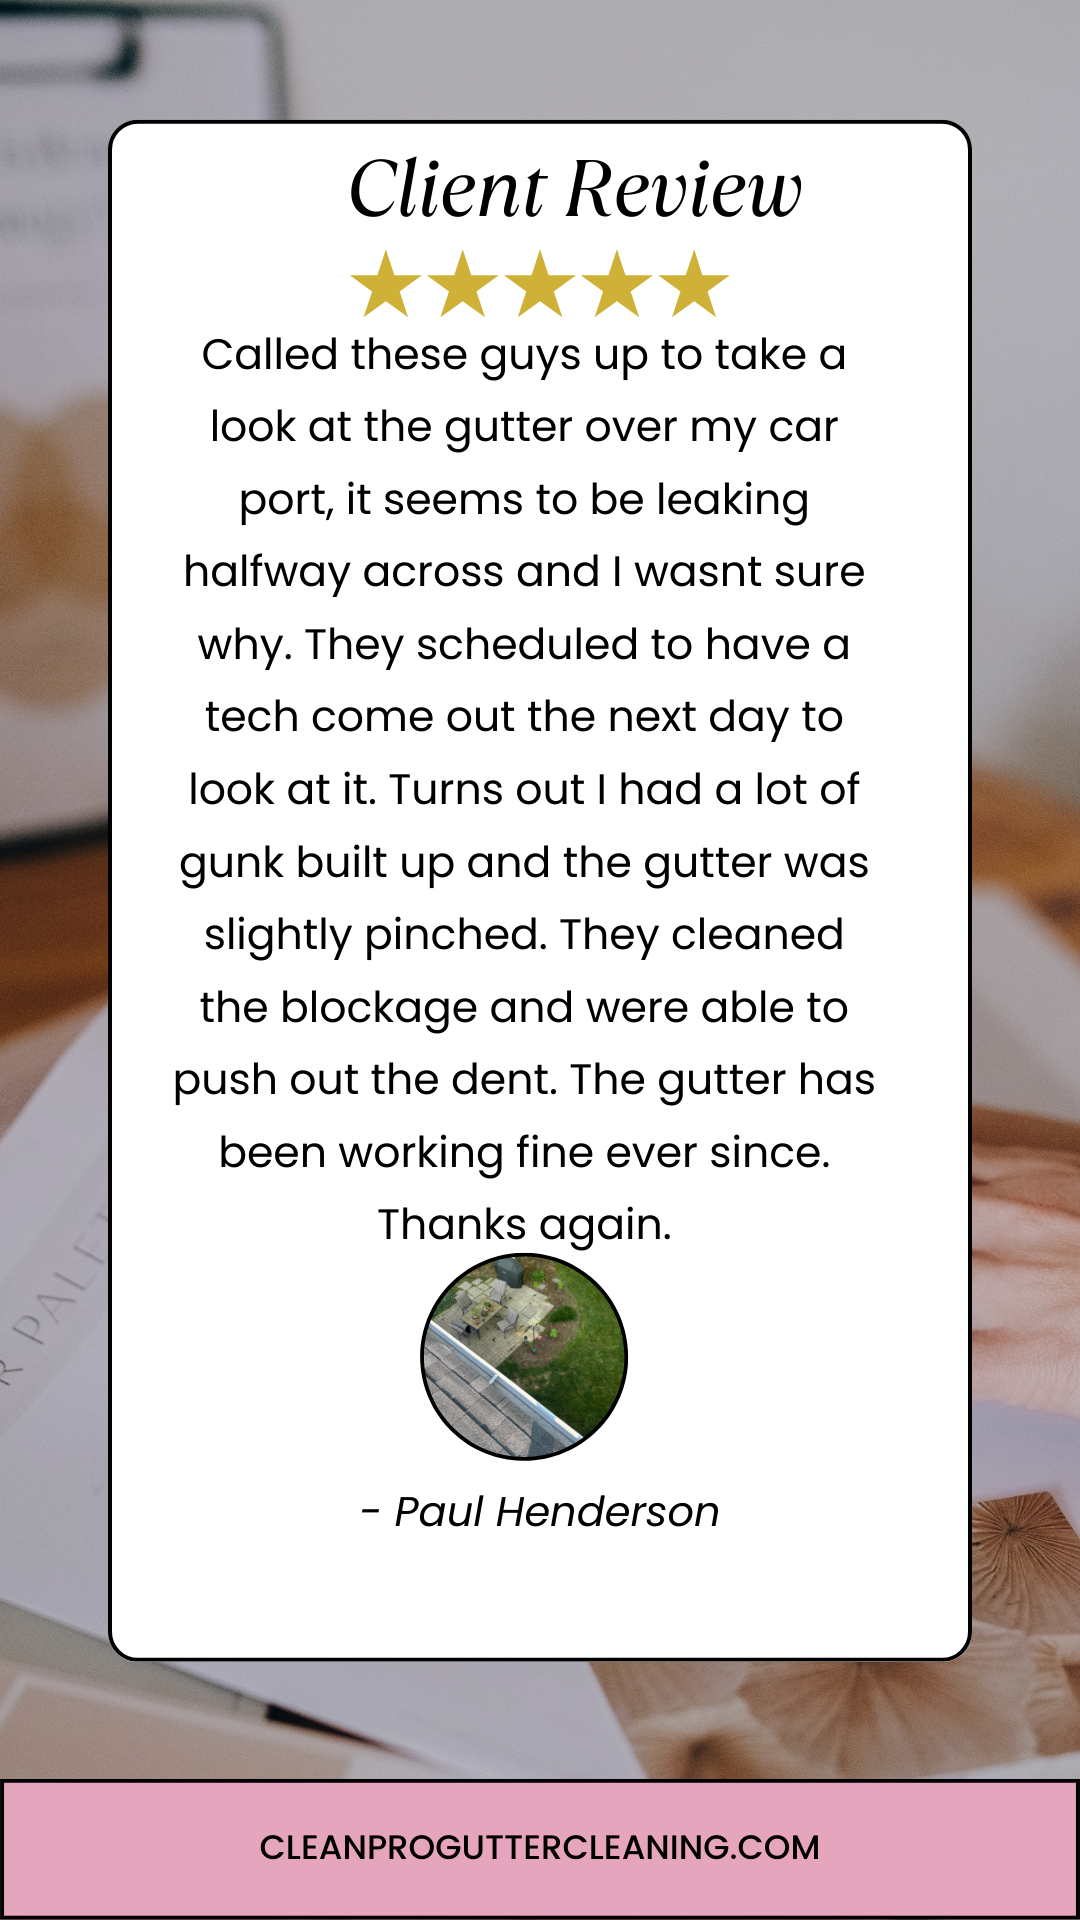 Paul from Little Rock, AR gives us a 5 star review for a recent gutter cleaning service.